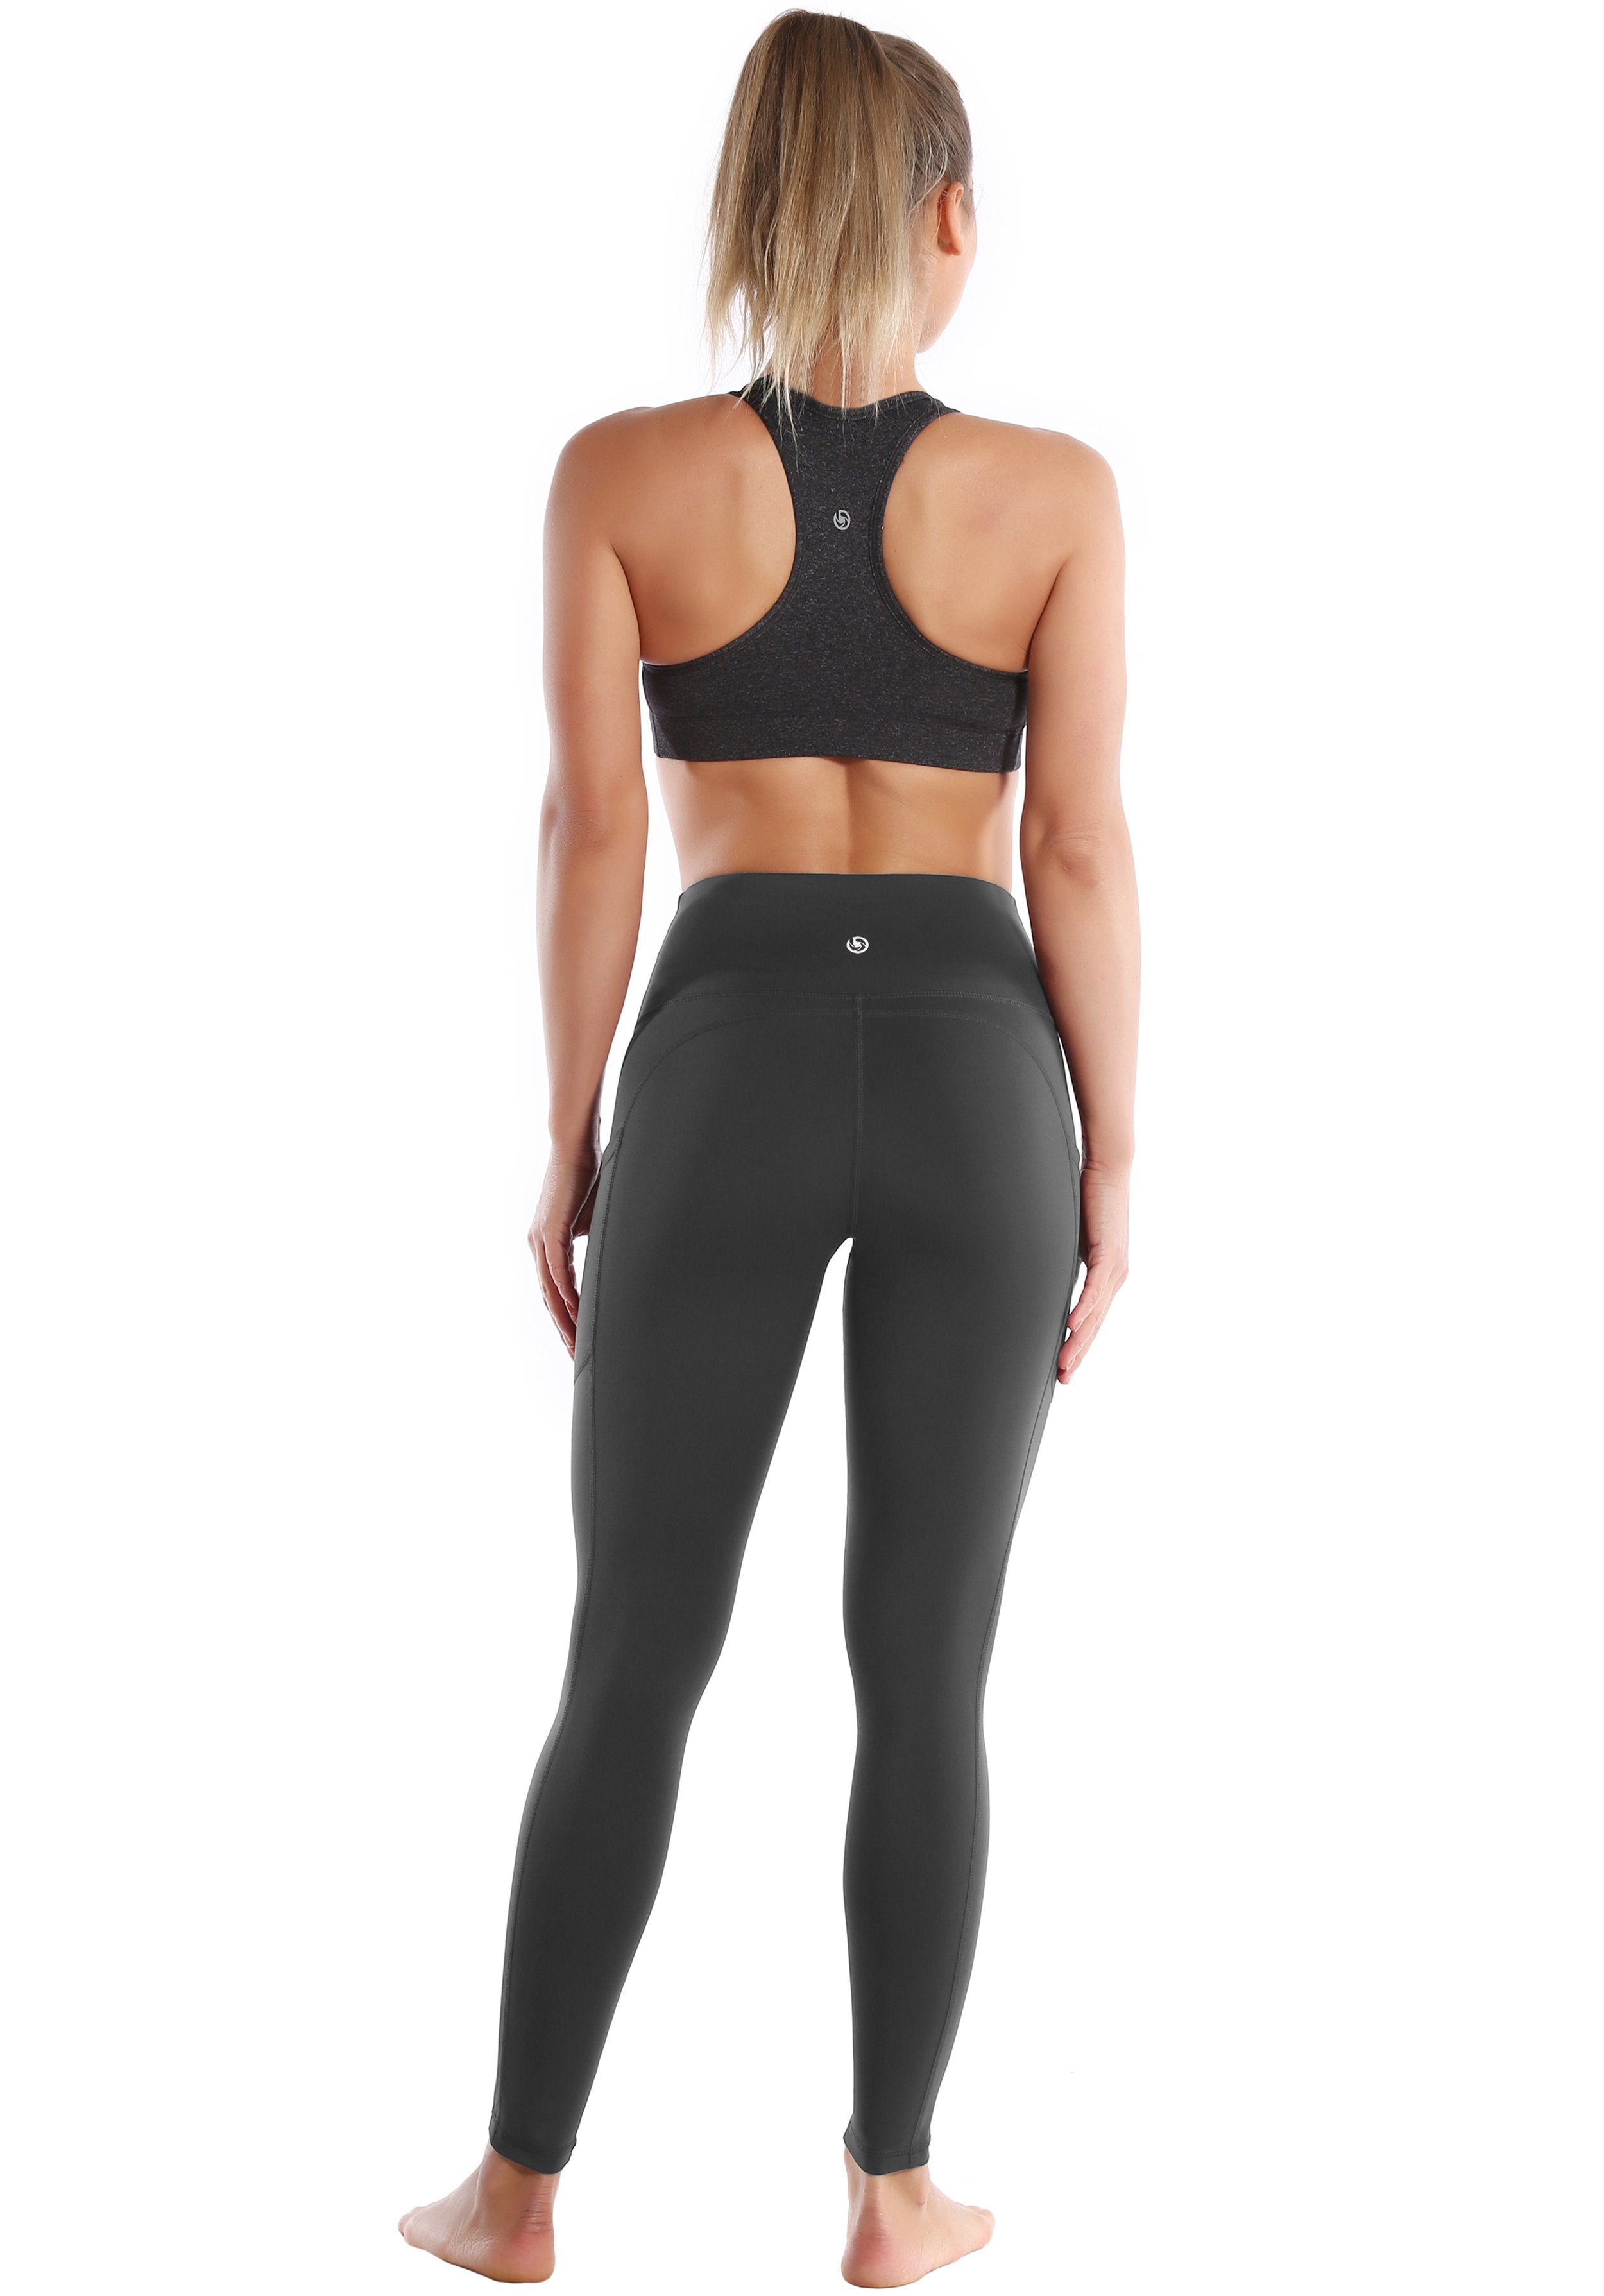 Hip Line Side Pockets Jogging Pants shadowcharcoal Sexy Hip Line Side Pockets 75%Nylon/25%Spandex Fabric doesn't attract lint easily 4-way stretch No see-through Moisture-wicking Tummy control Inner pocket Two lengths